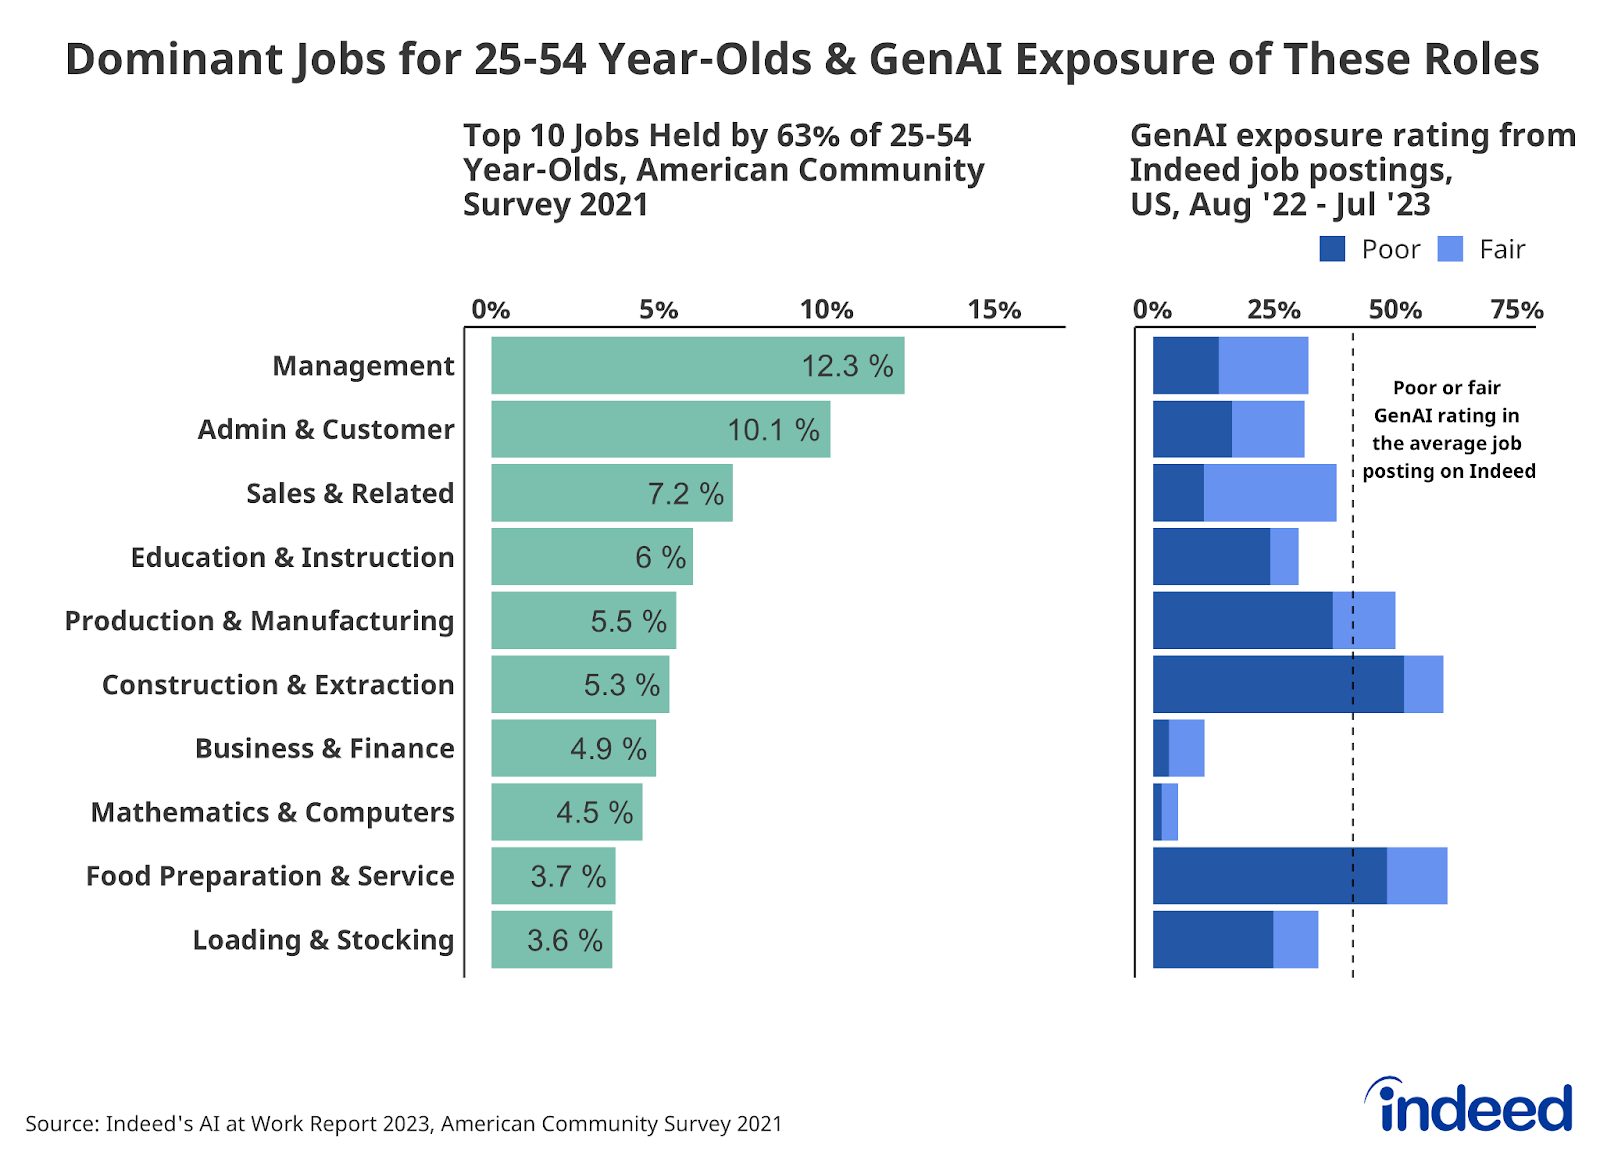 A series of two bar graphs titled "Dominant jobs for 25-54-year-olds & GenAI exposure of these roles," shows the top 10 jobs held by 63% of 25-54-year-olds and the corresponding GenAi exposure of those jobs. Management was the most common type of job at 12.3%, while Loading & Stocking was the rarest. 